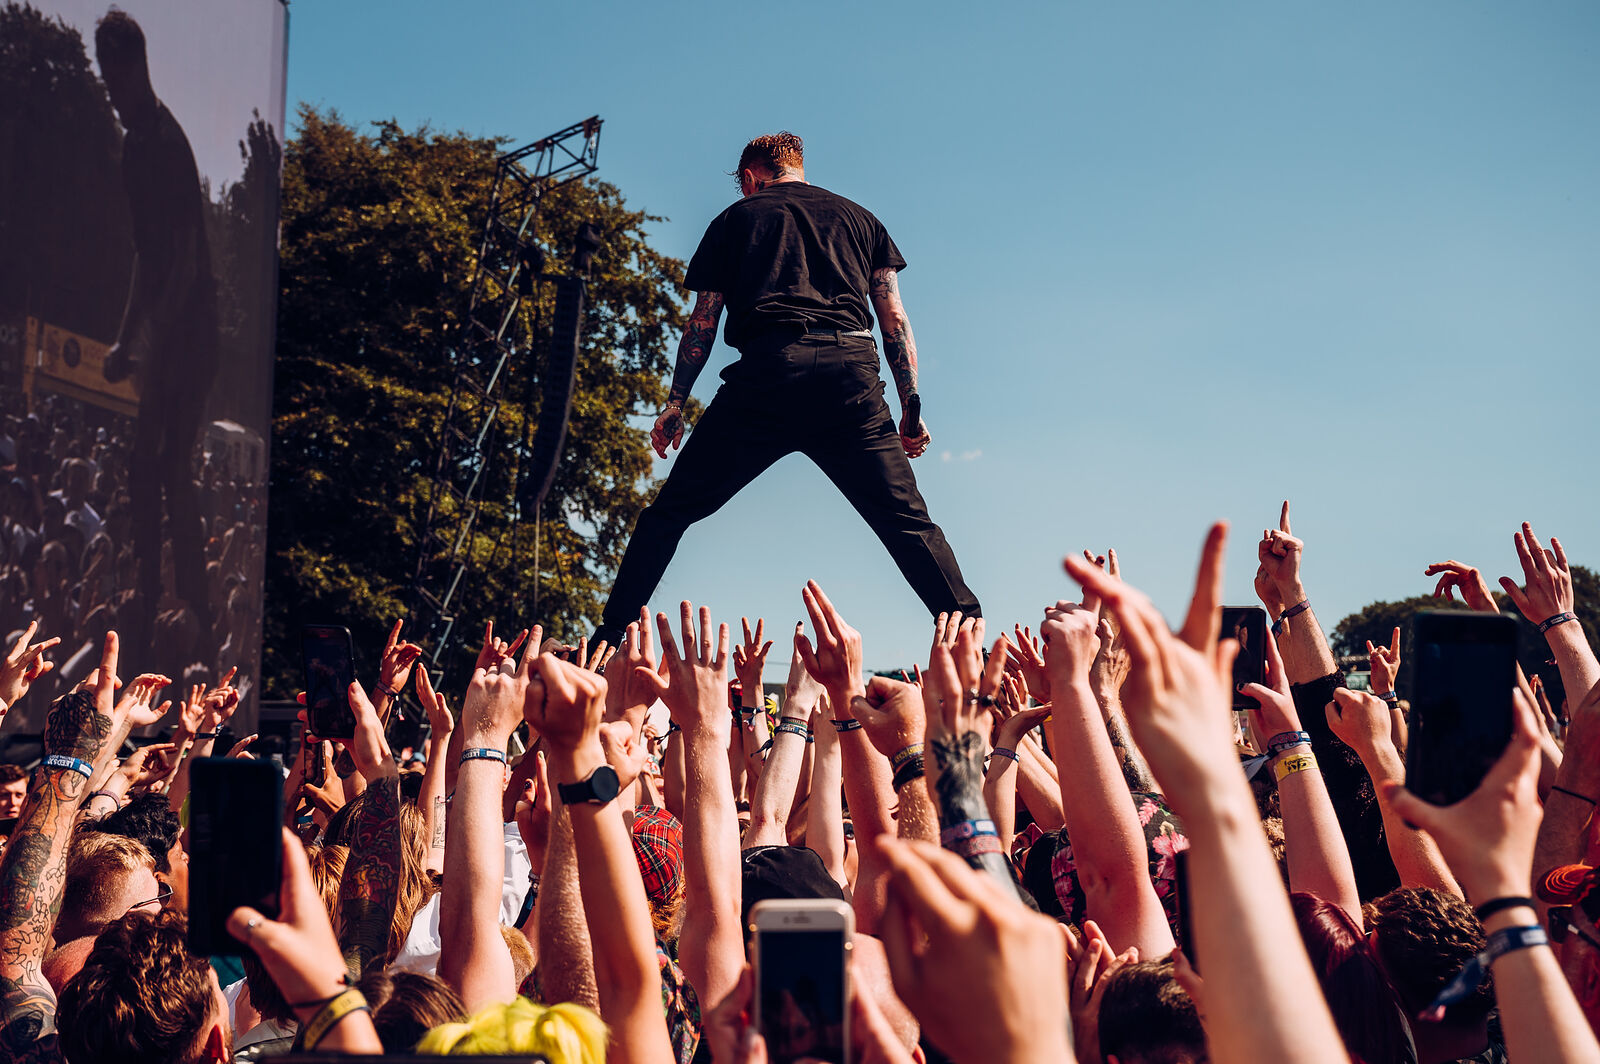 Frank Carter and The Rattlesnakes